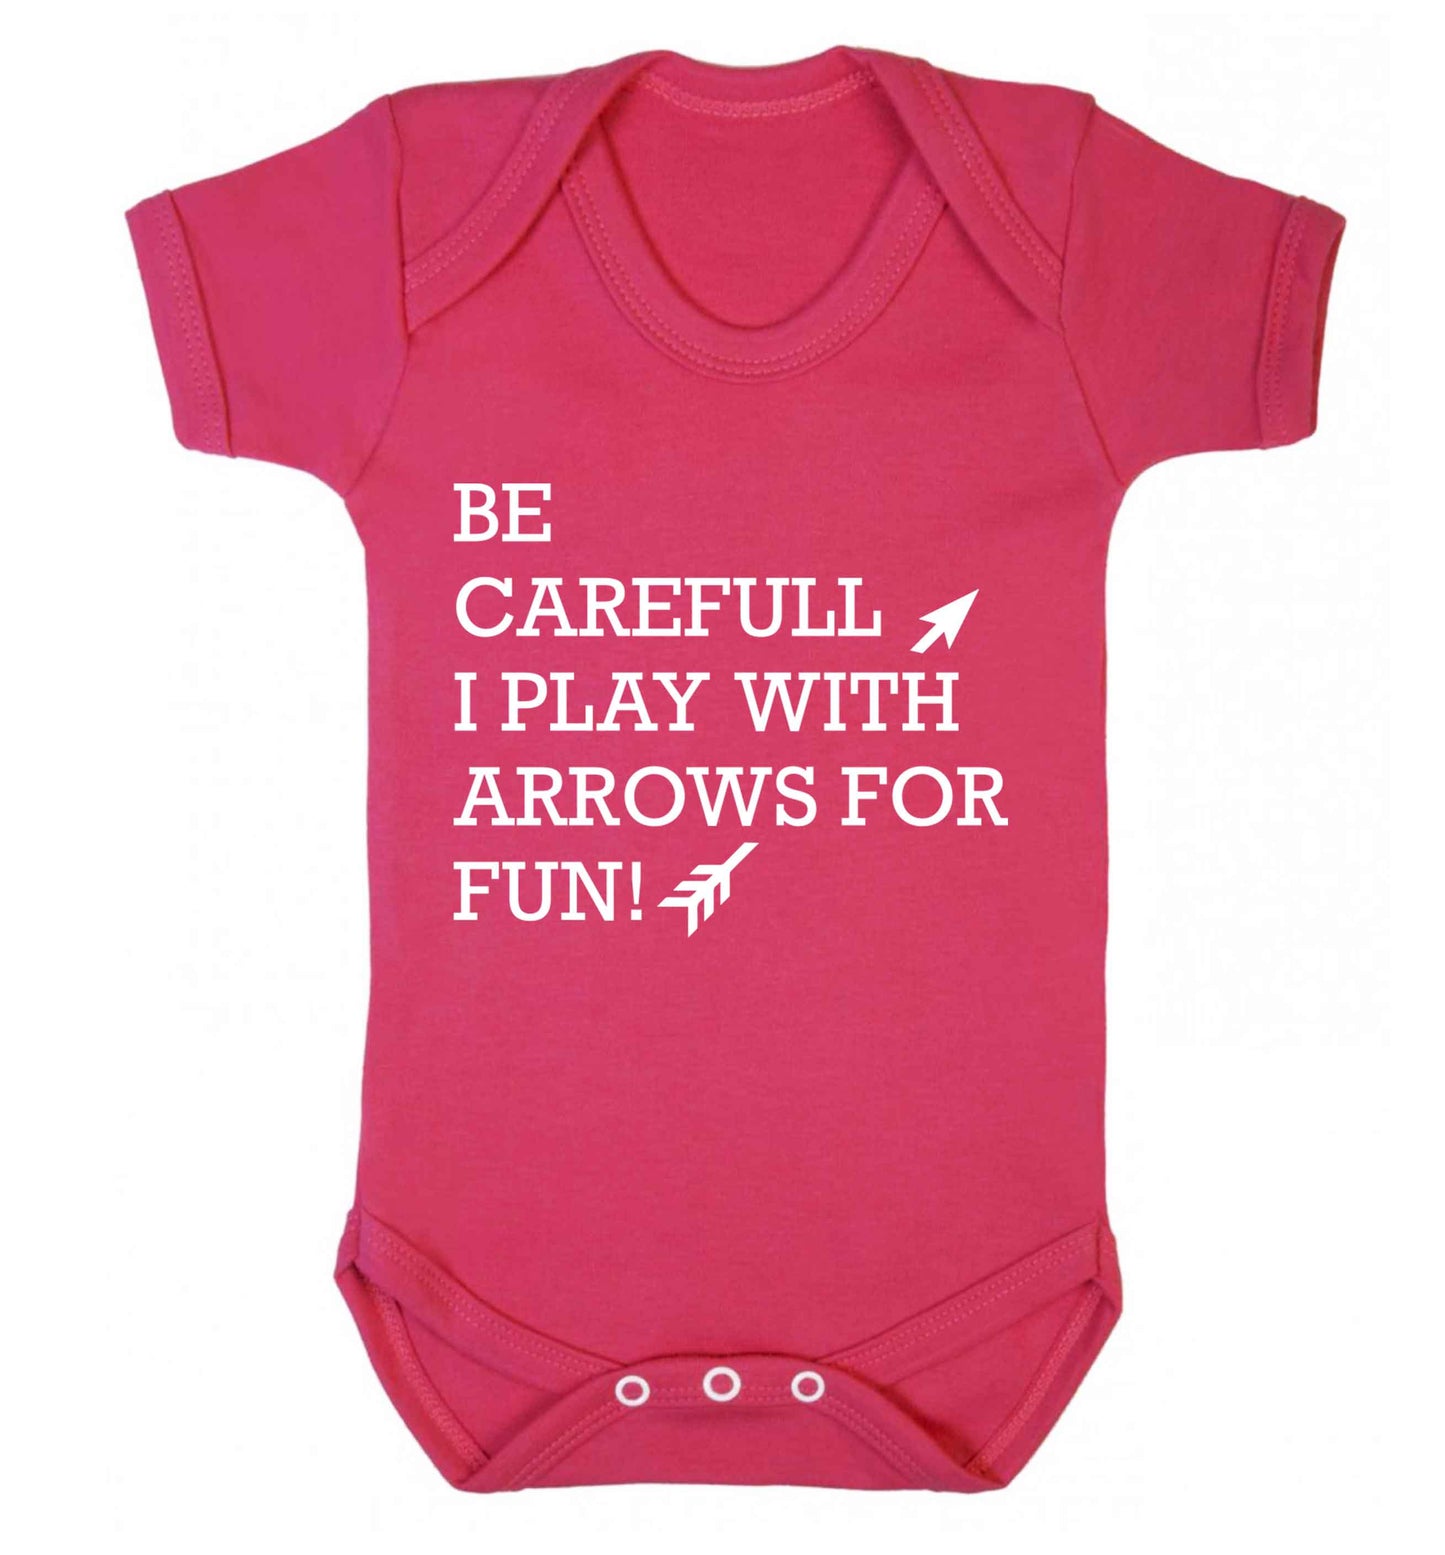 Be carefull I play with arrows for fun Baby Vest dark pink 18-24 months